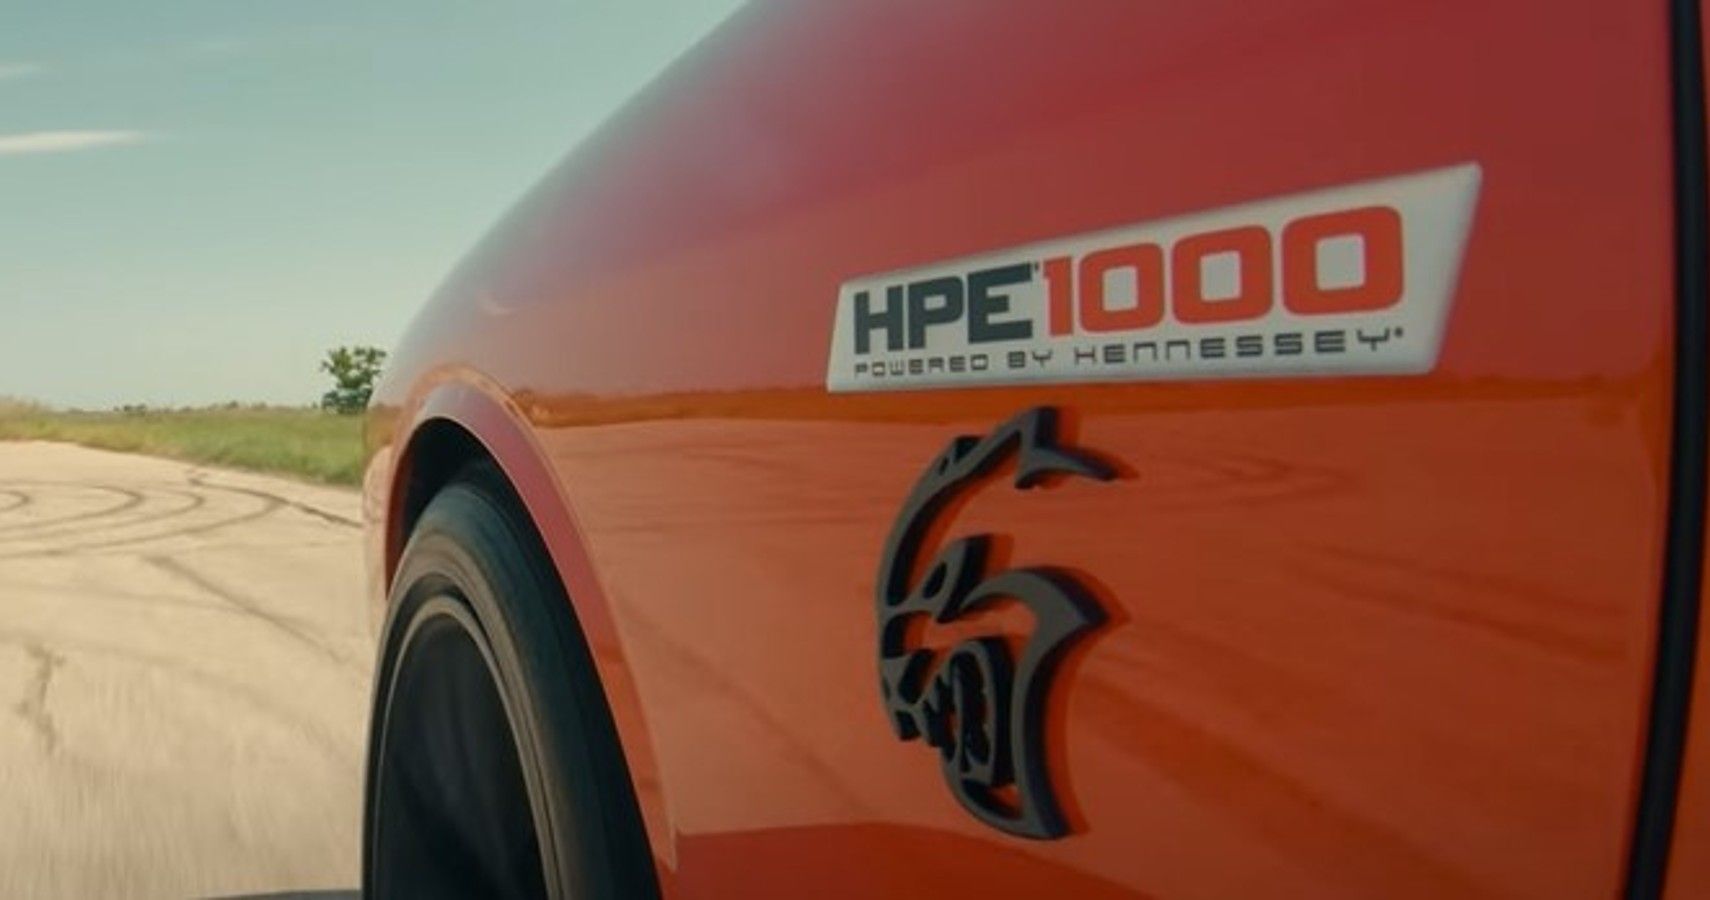 Driver's side fender of a Hennessey HPE1000 Dodge Challenger Hellcat